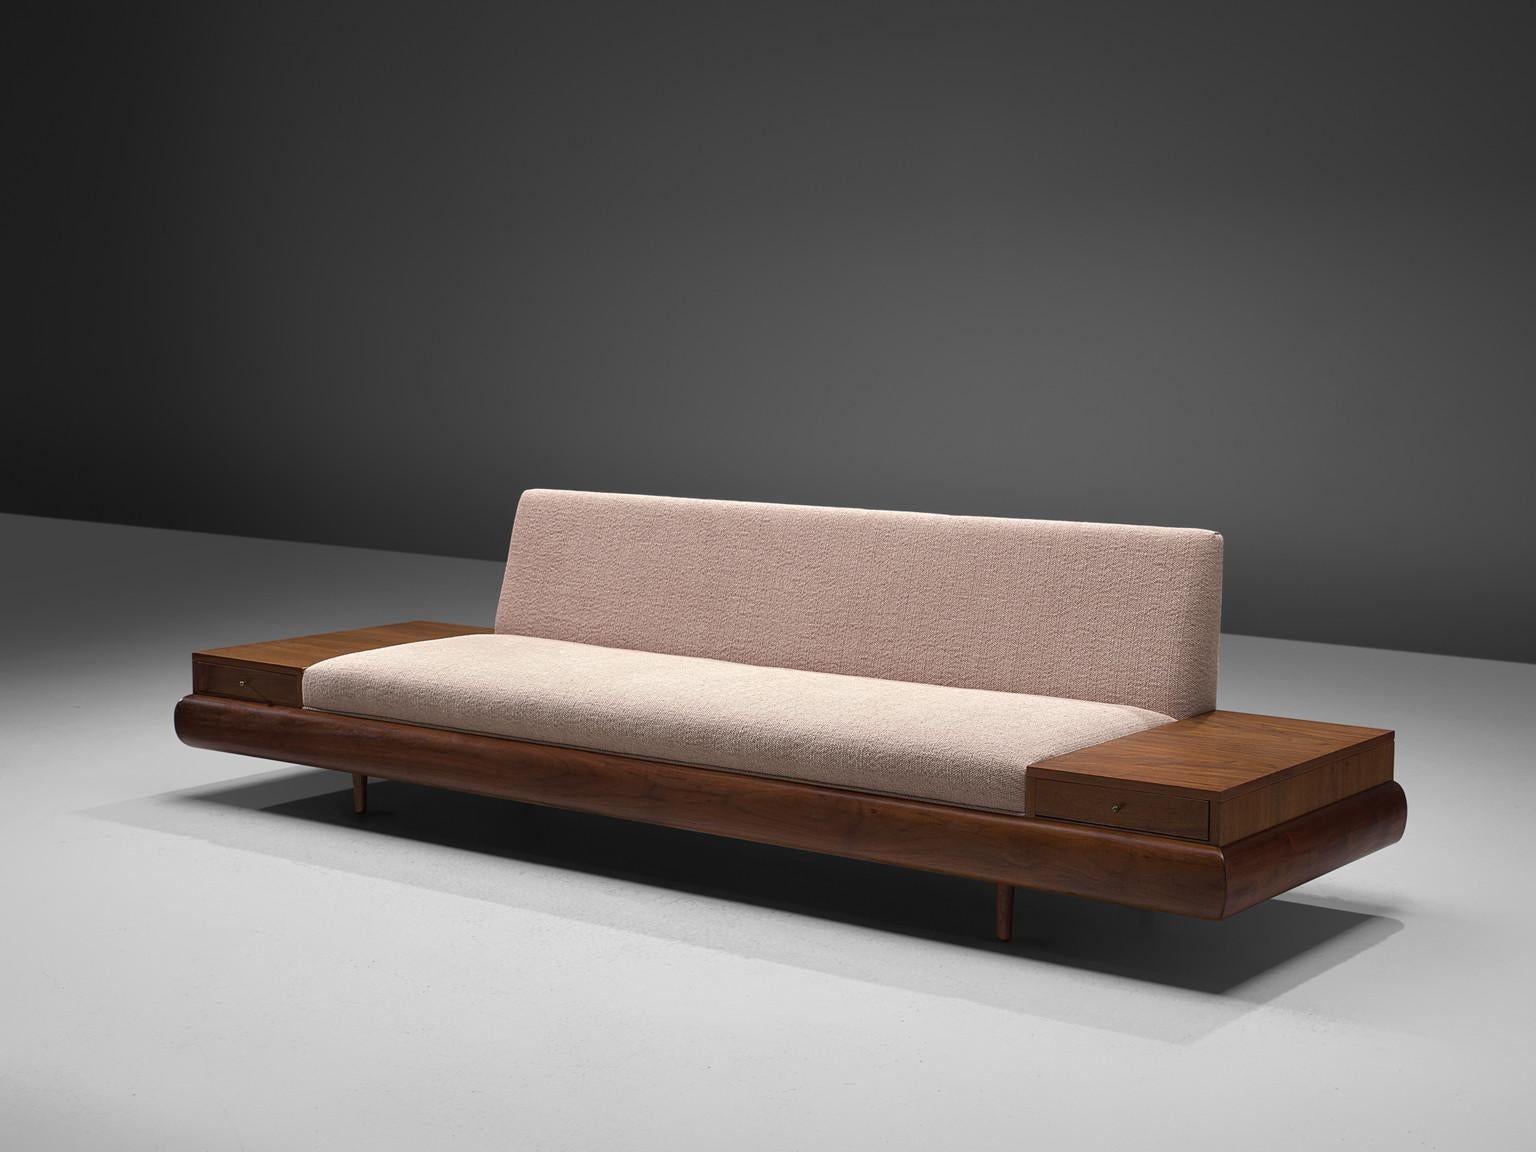 Adrian Pearsall, 'Platform' sofa with two drawers, fabric, walnut, United States, 1960s

Adrian Pearsall is known for his rather unique sofa designs. The present model is no exception. On a low base of a thick walnut frame rests the sofa flanked